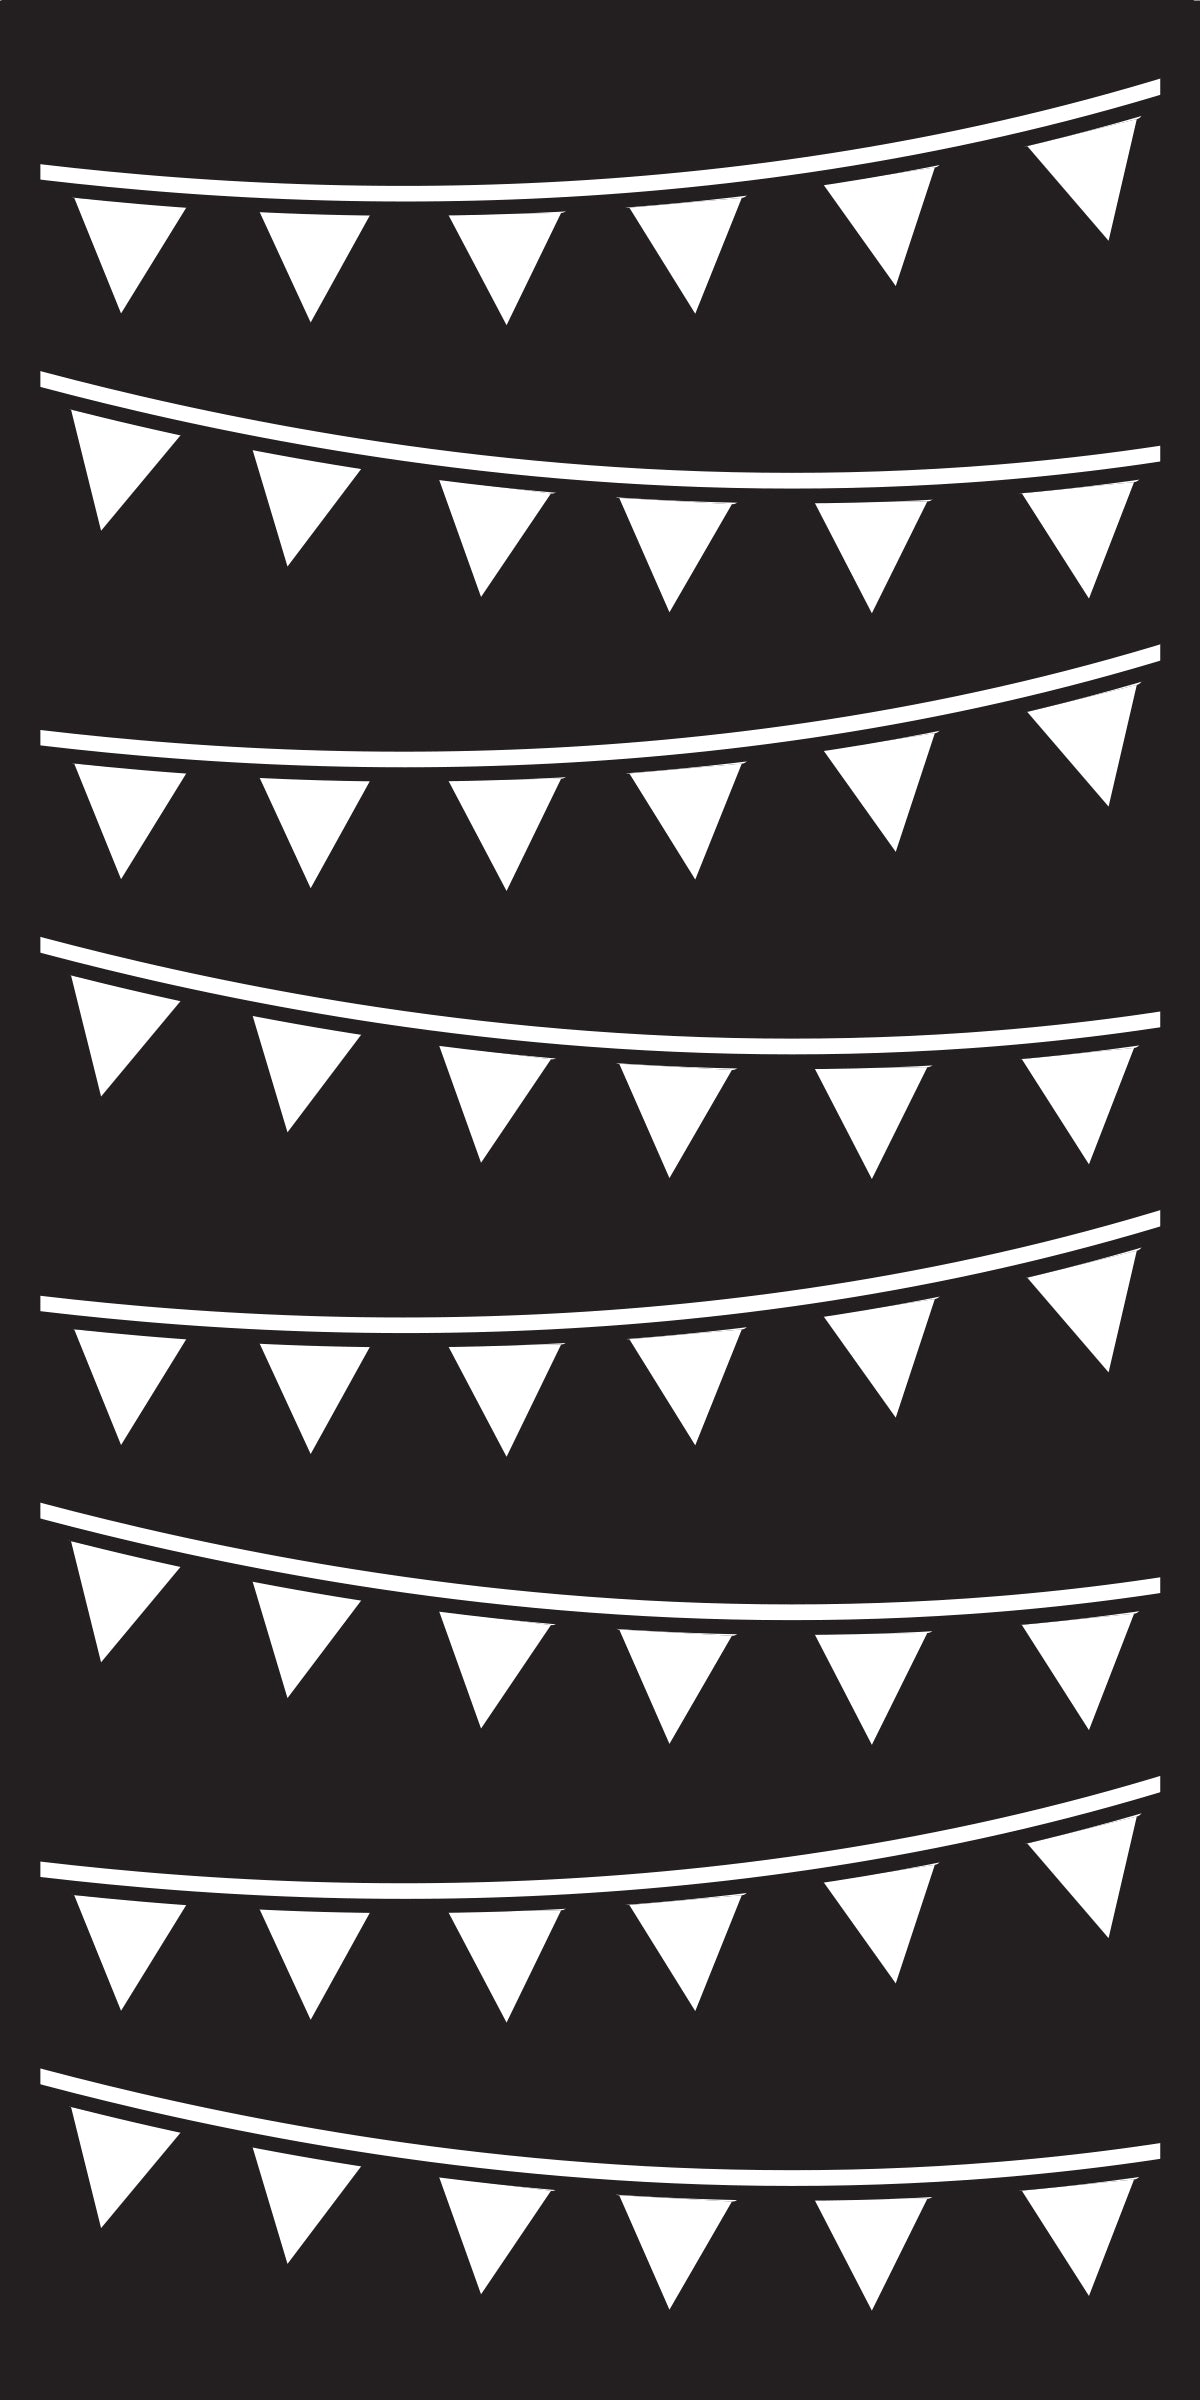 Creative Expressions Bunting DL Stencil 4 in x 8 in (10.0 x 20.3 cm)